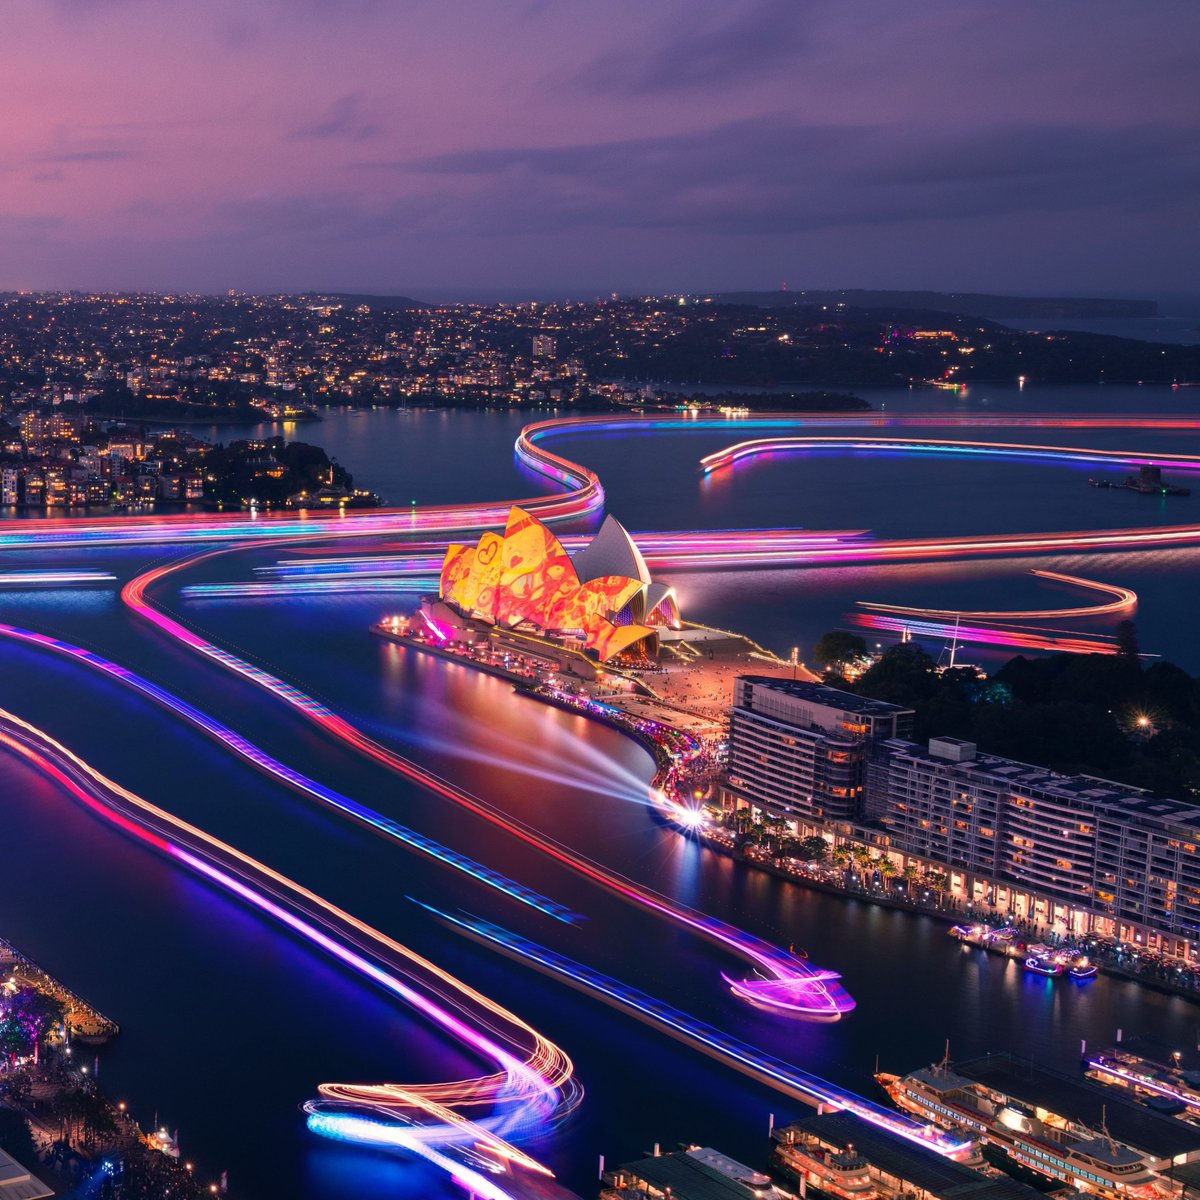 📣 PSA: 𝟳 𝗺𝗼𝗻𝘁𝗵𝘀 𝘁𝗼 𝗴𝗼 until the sun sets and the city lights up with our #vividsydney magic. What do you want to see in our 2024 Vivid Light, Music, Ideas, and Food program? 👇 💡 𝟮𝟰 𝗠𝗮𝘆 – 𝟭𝟱 𝗝𝘂𝗻𝗲 𝟮𝟬𝟮𝟰 📸 IG/_danieltran_